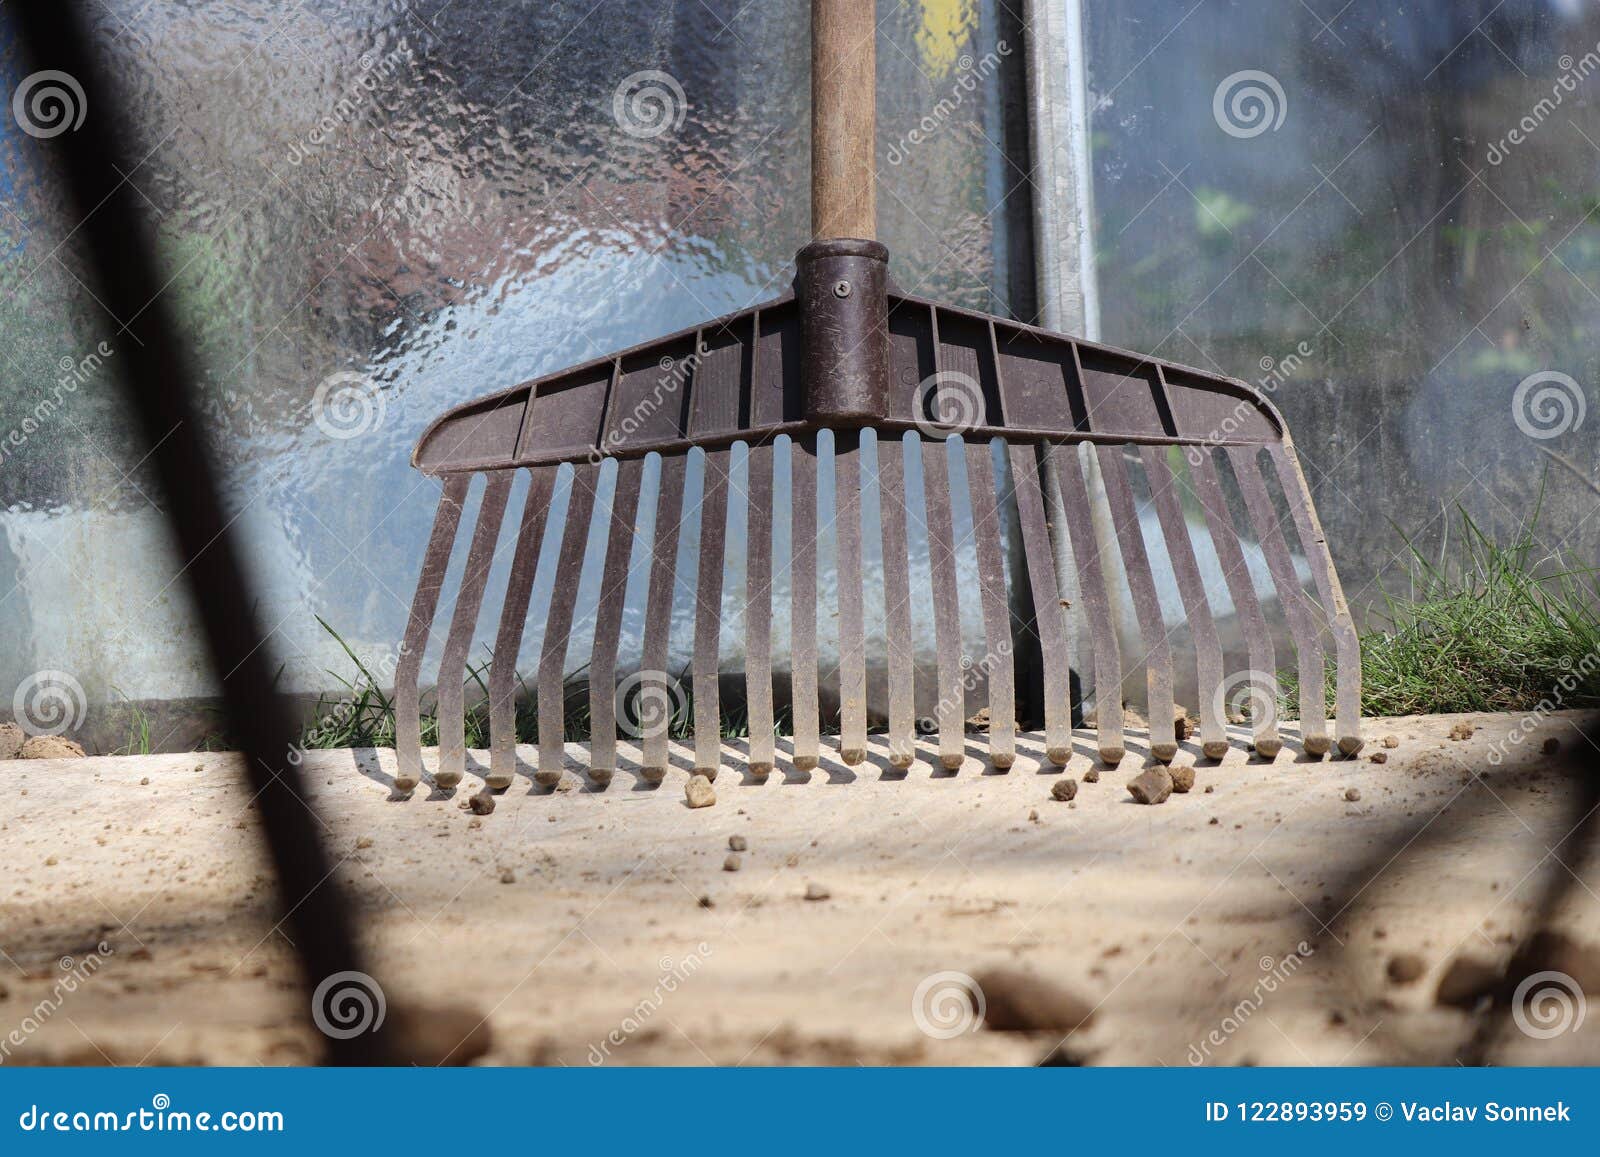 A Plastic Brown Rake Leaning Against Greenhouse. Also with Small Stones ...